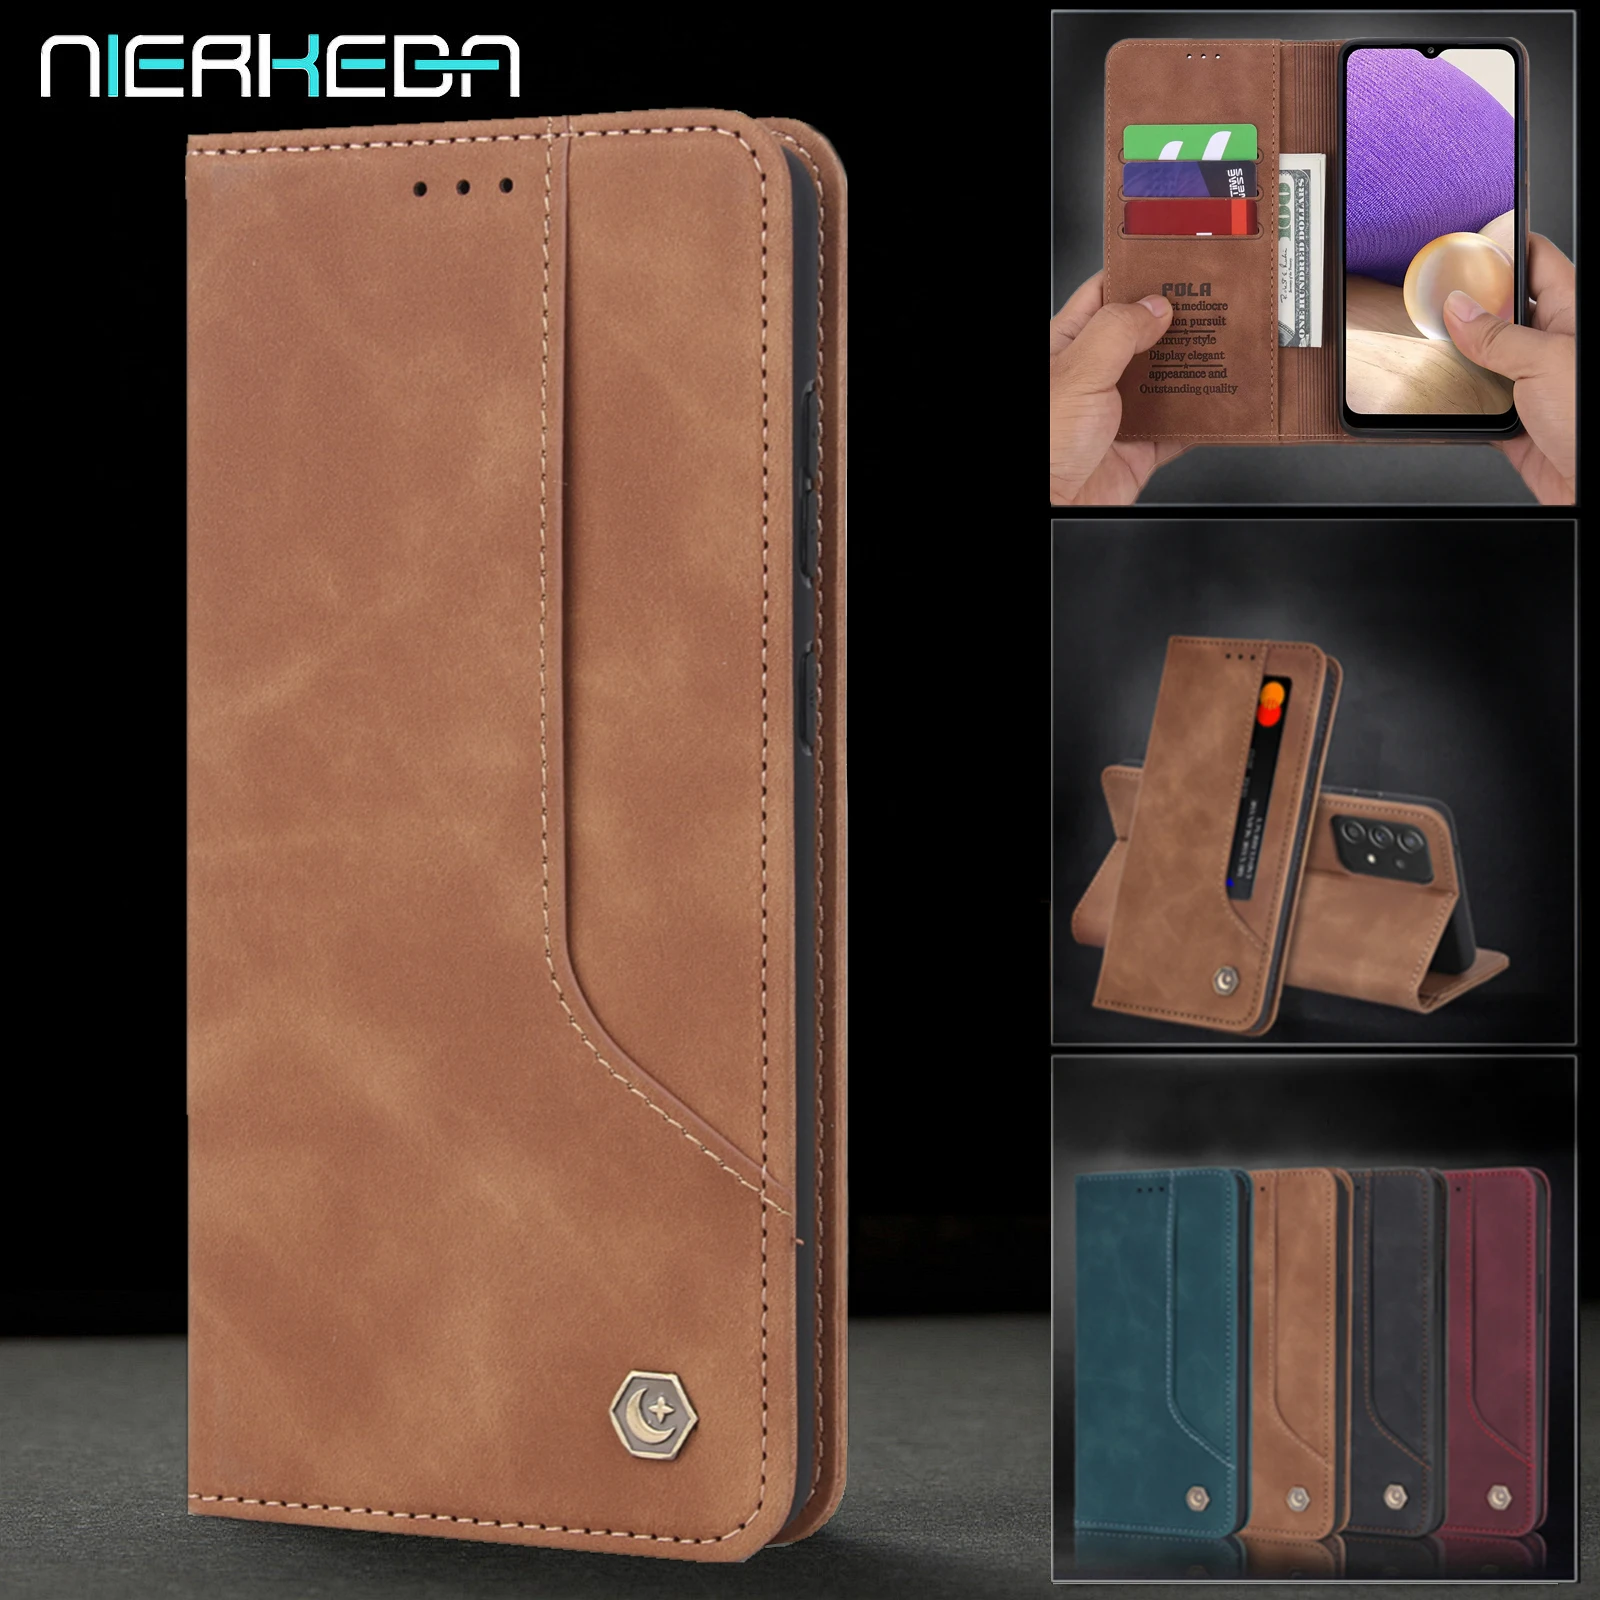 

Leather Wallet Case for Samsung Galaxy A10 A20 E A30 A40 A50 A70 S A10E A20E A50S A70S A30S A20S A10S Magnetic Flip Phone Cover